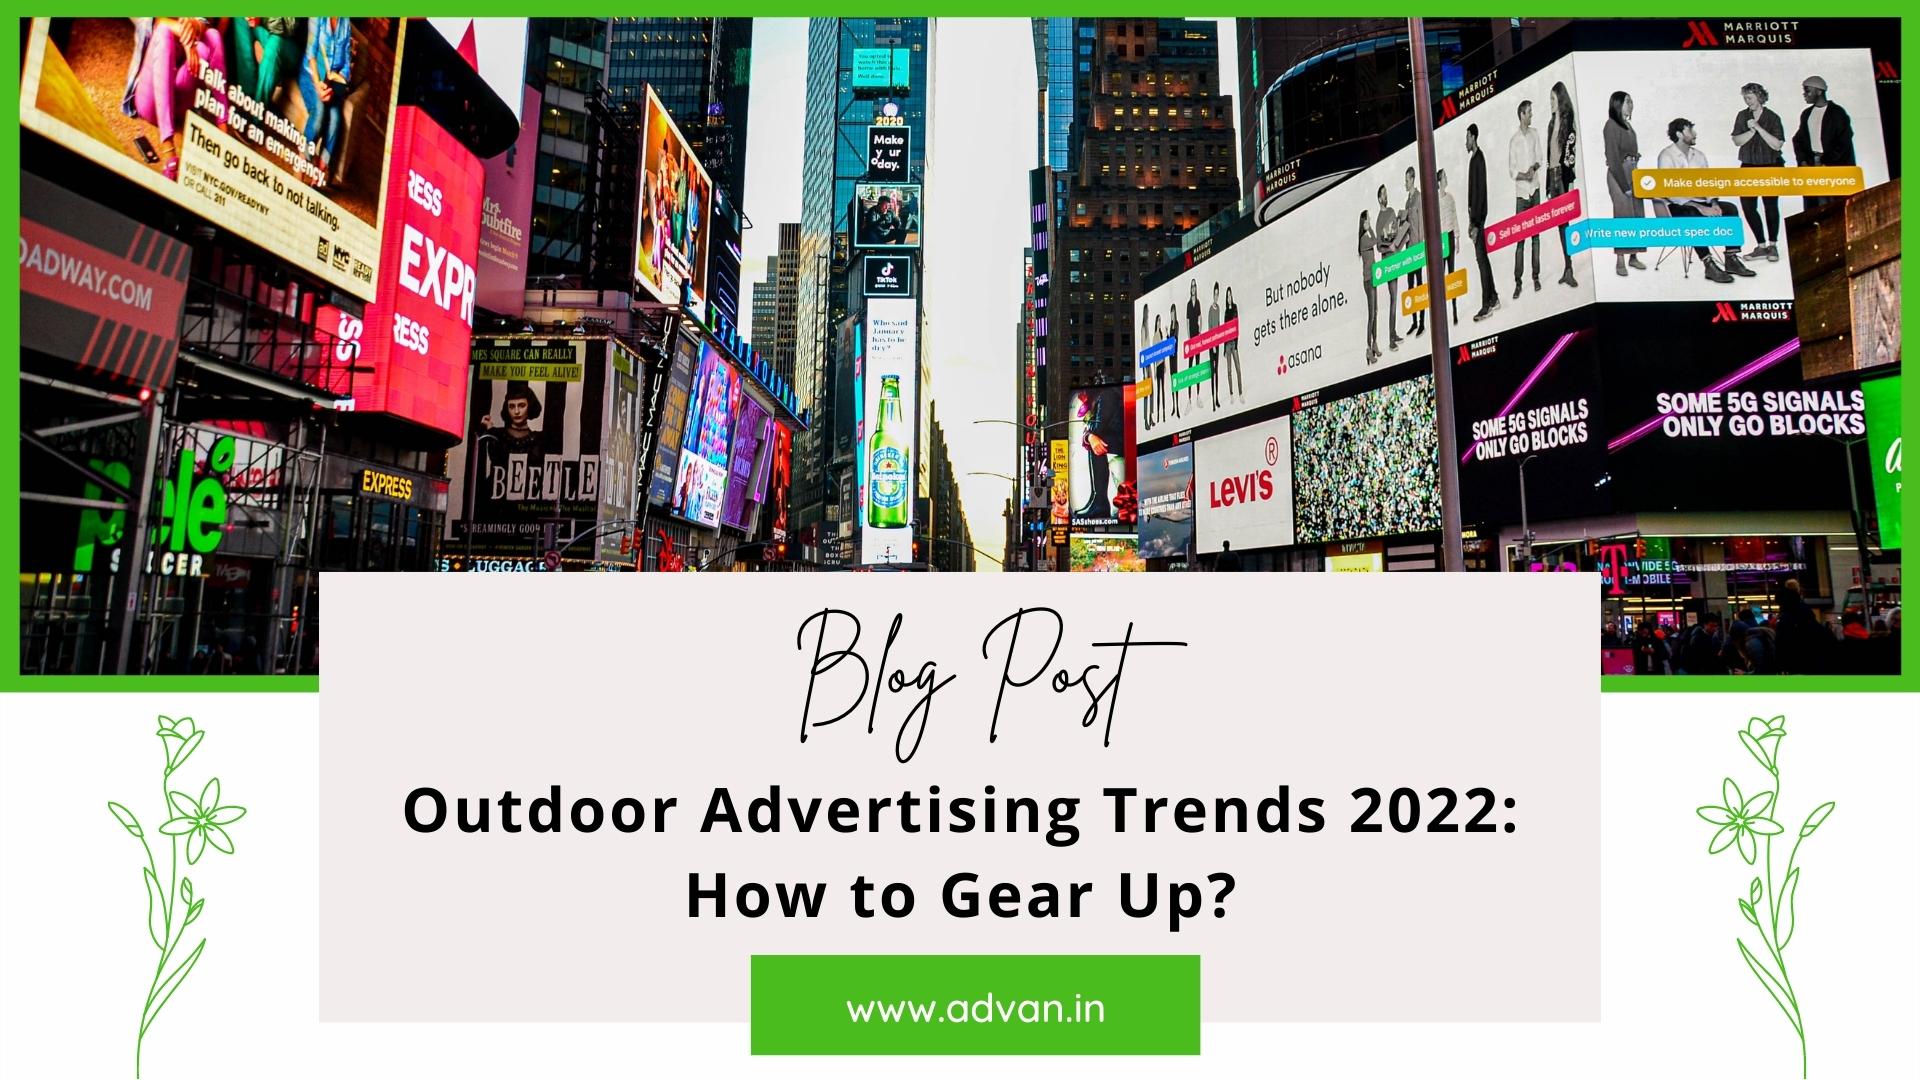 The-picture-depicting-outdoor-advertising-trends